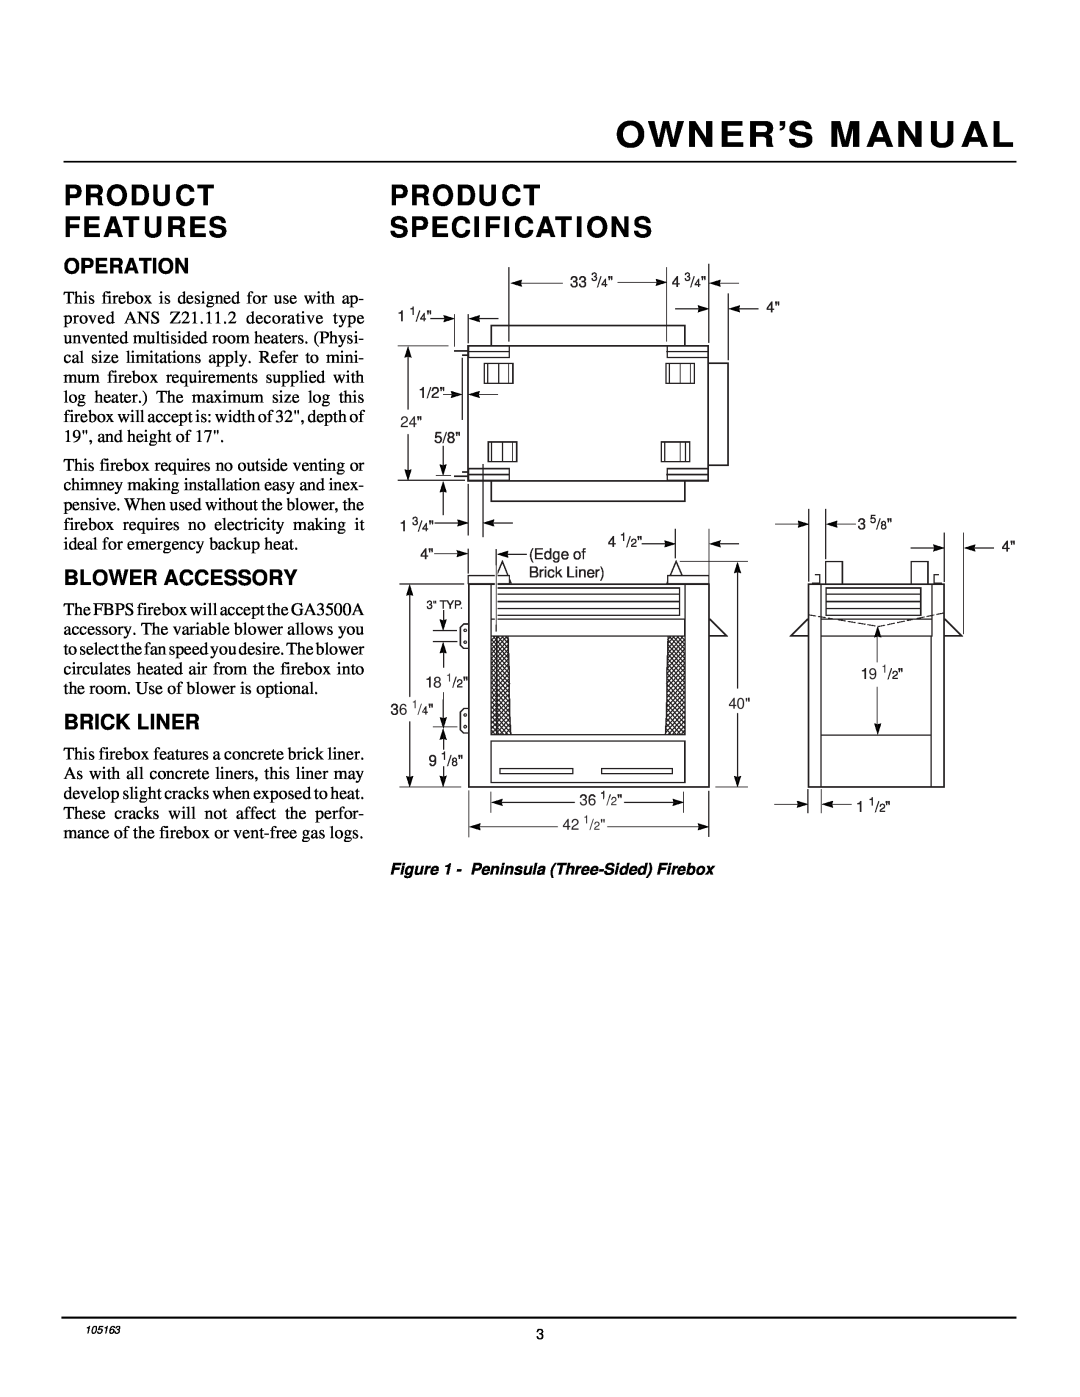 Desa FBPS installation manual Product Features, Specifications 